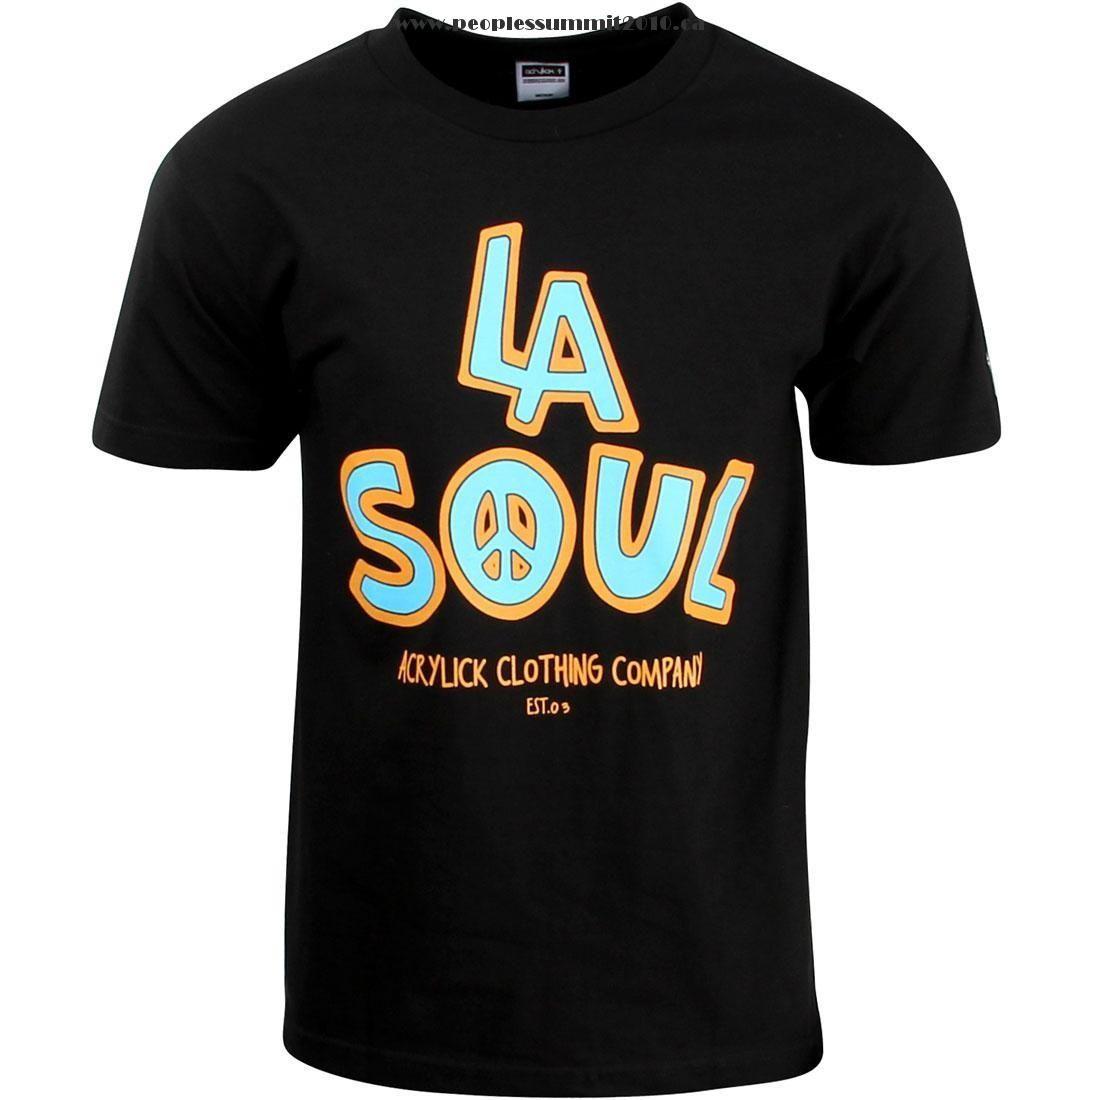 Acrylick Clothing Logo - Canada outlet online Acrylick LA Soul Tee (black) price -